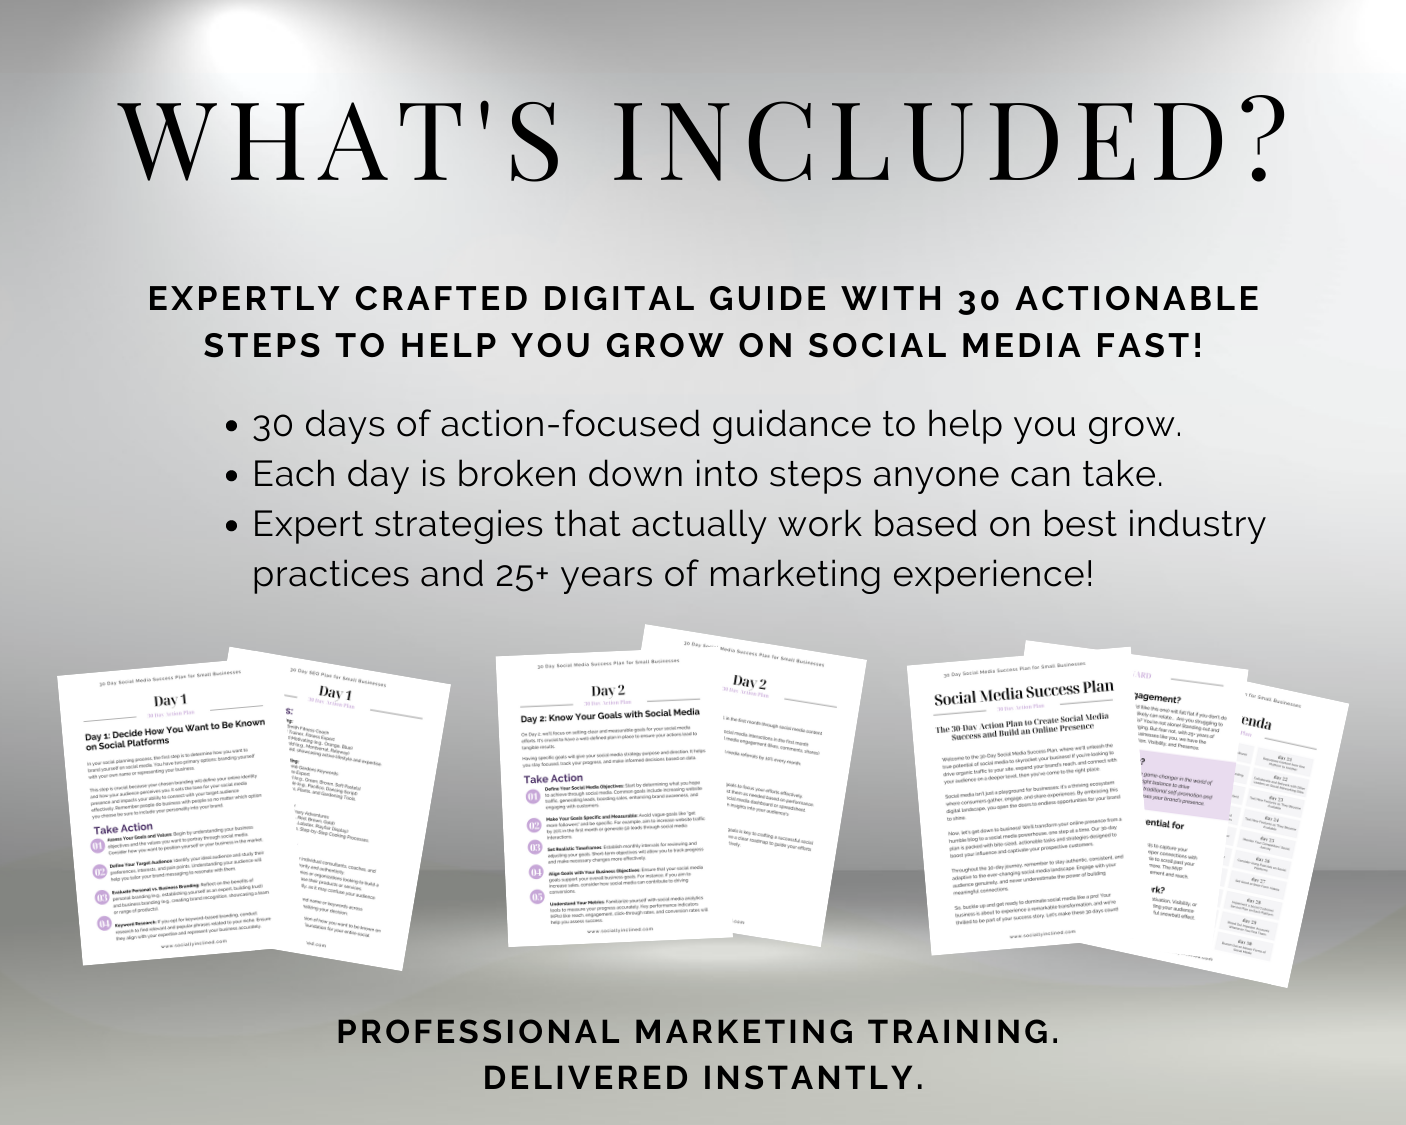 Advertising image for a Get Socially Inclined Social Media Success: 30-Day Action Plan with social media growth strategies, highlighting instant delivery and including sample pages.